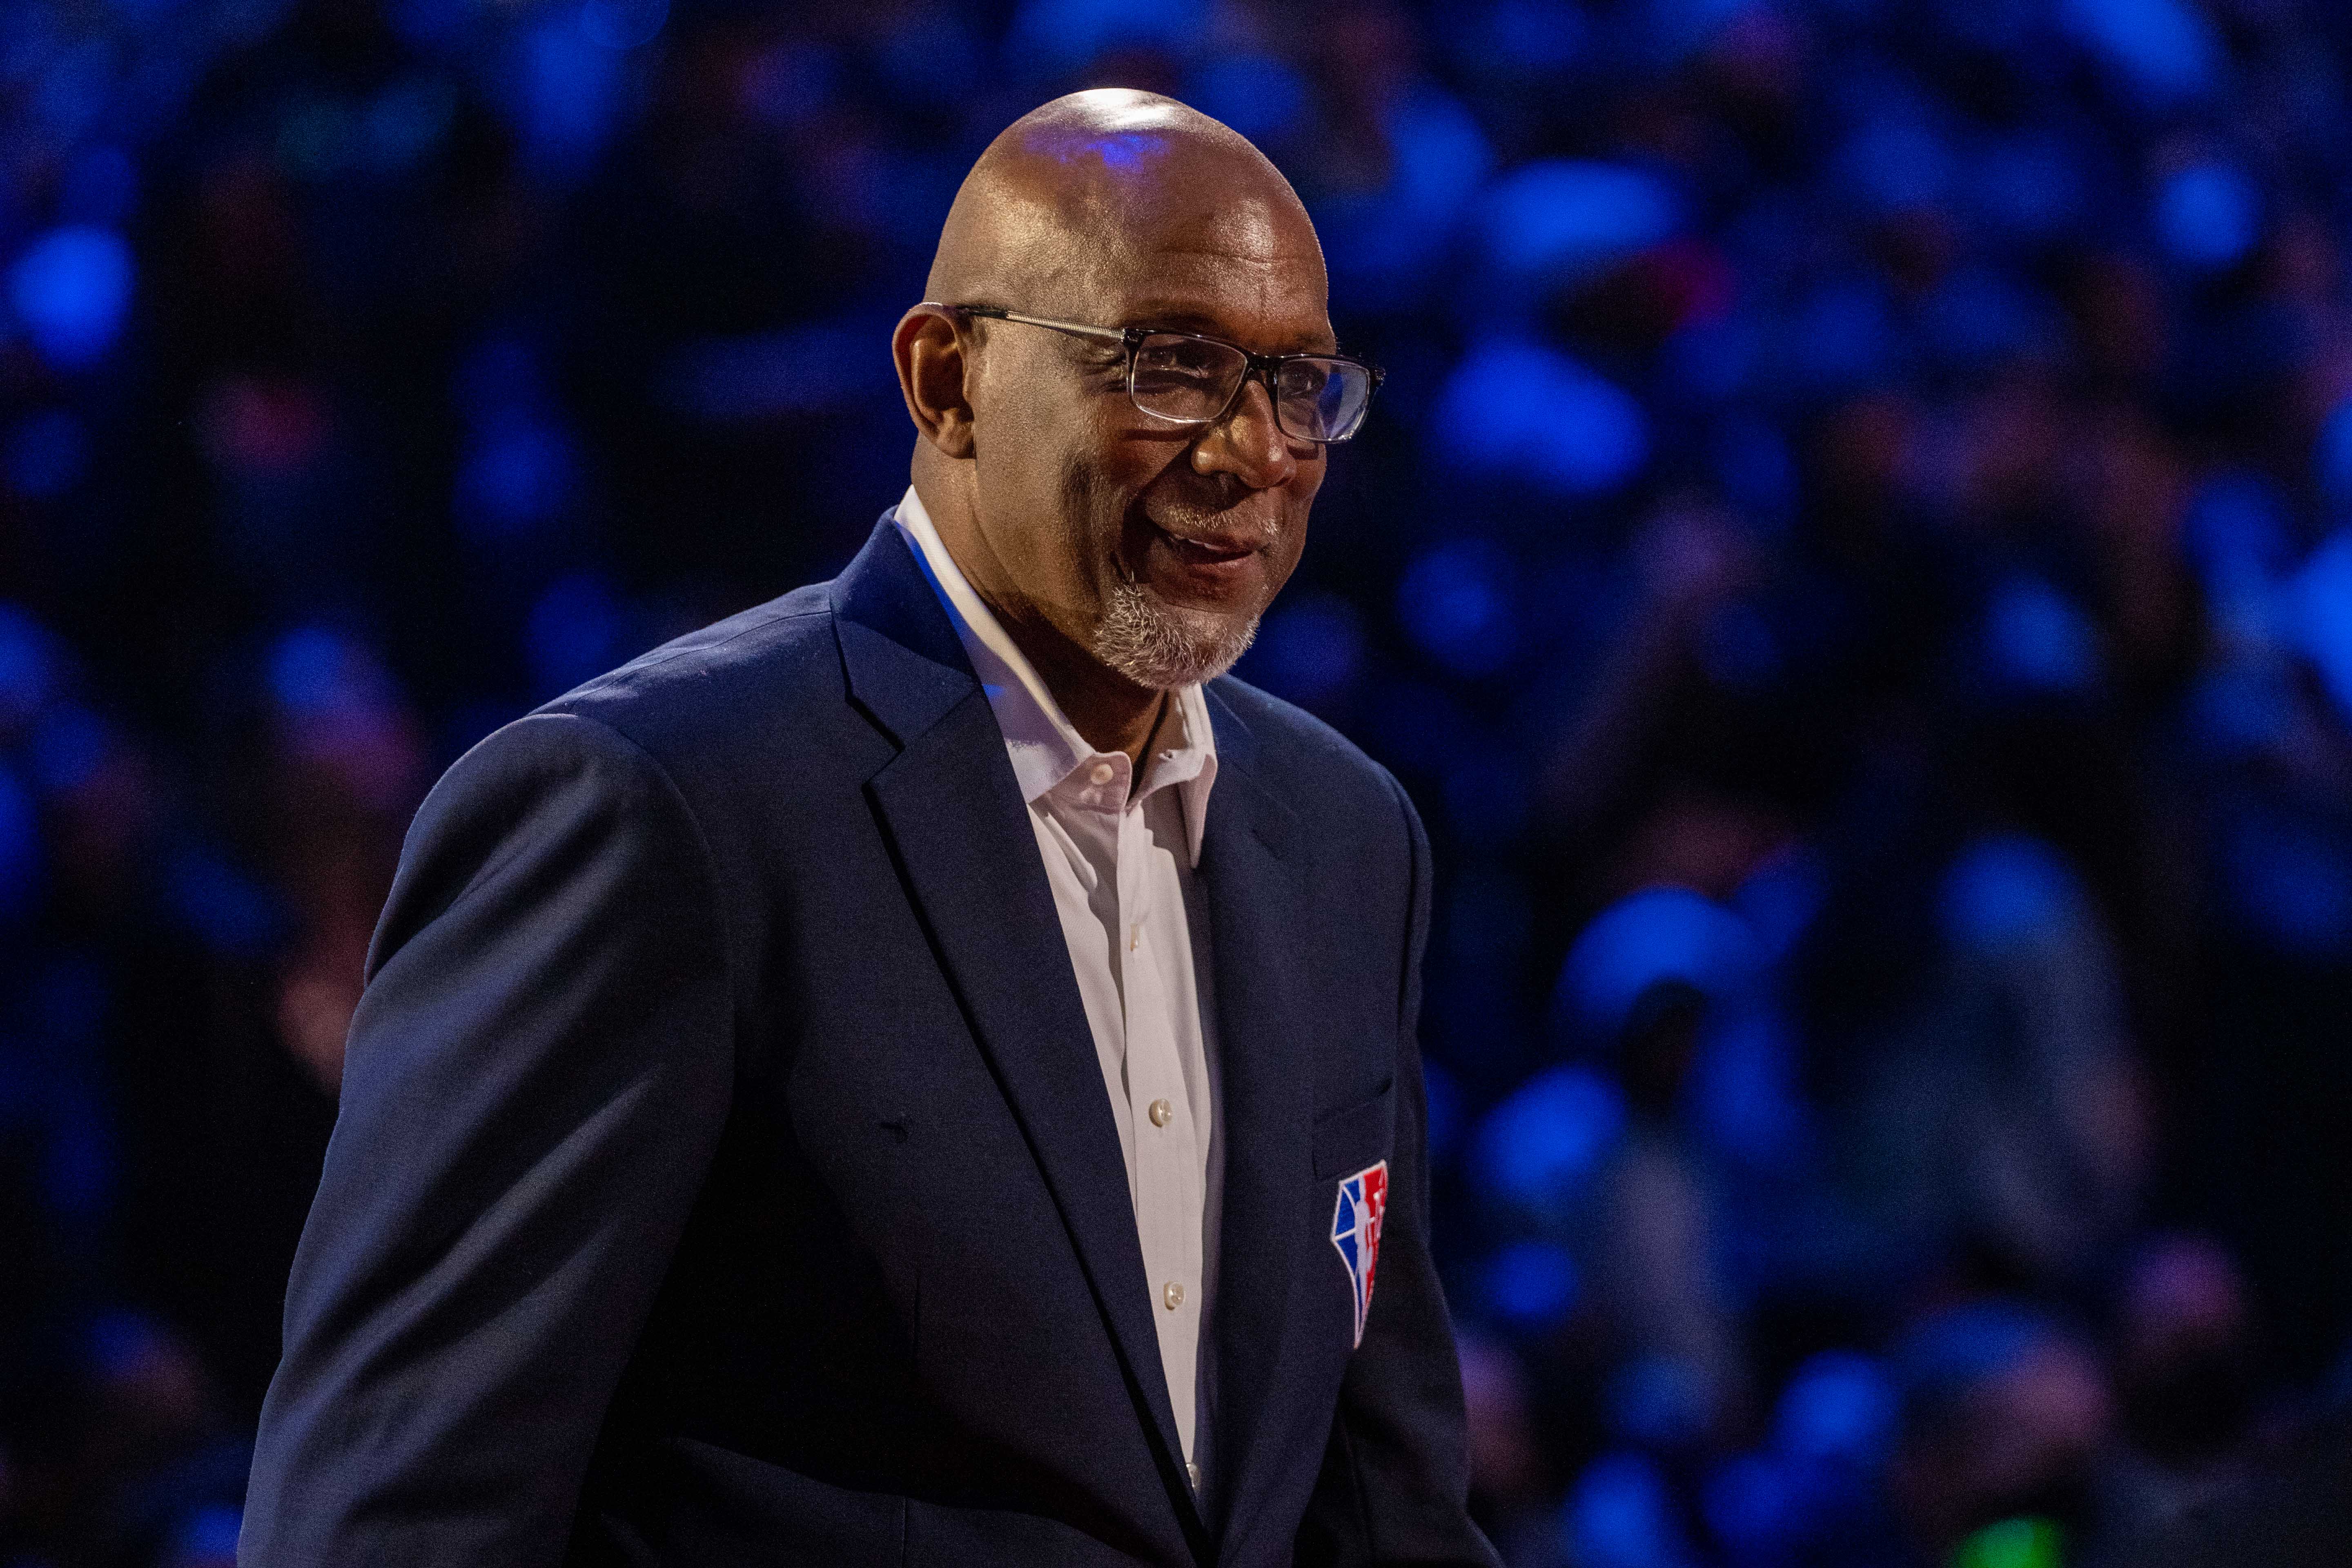 Rockets legend Clyde Drexler honored by Houston Sports Hall of Fame